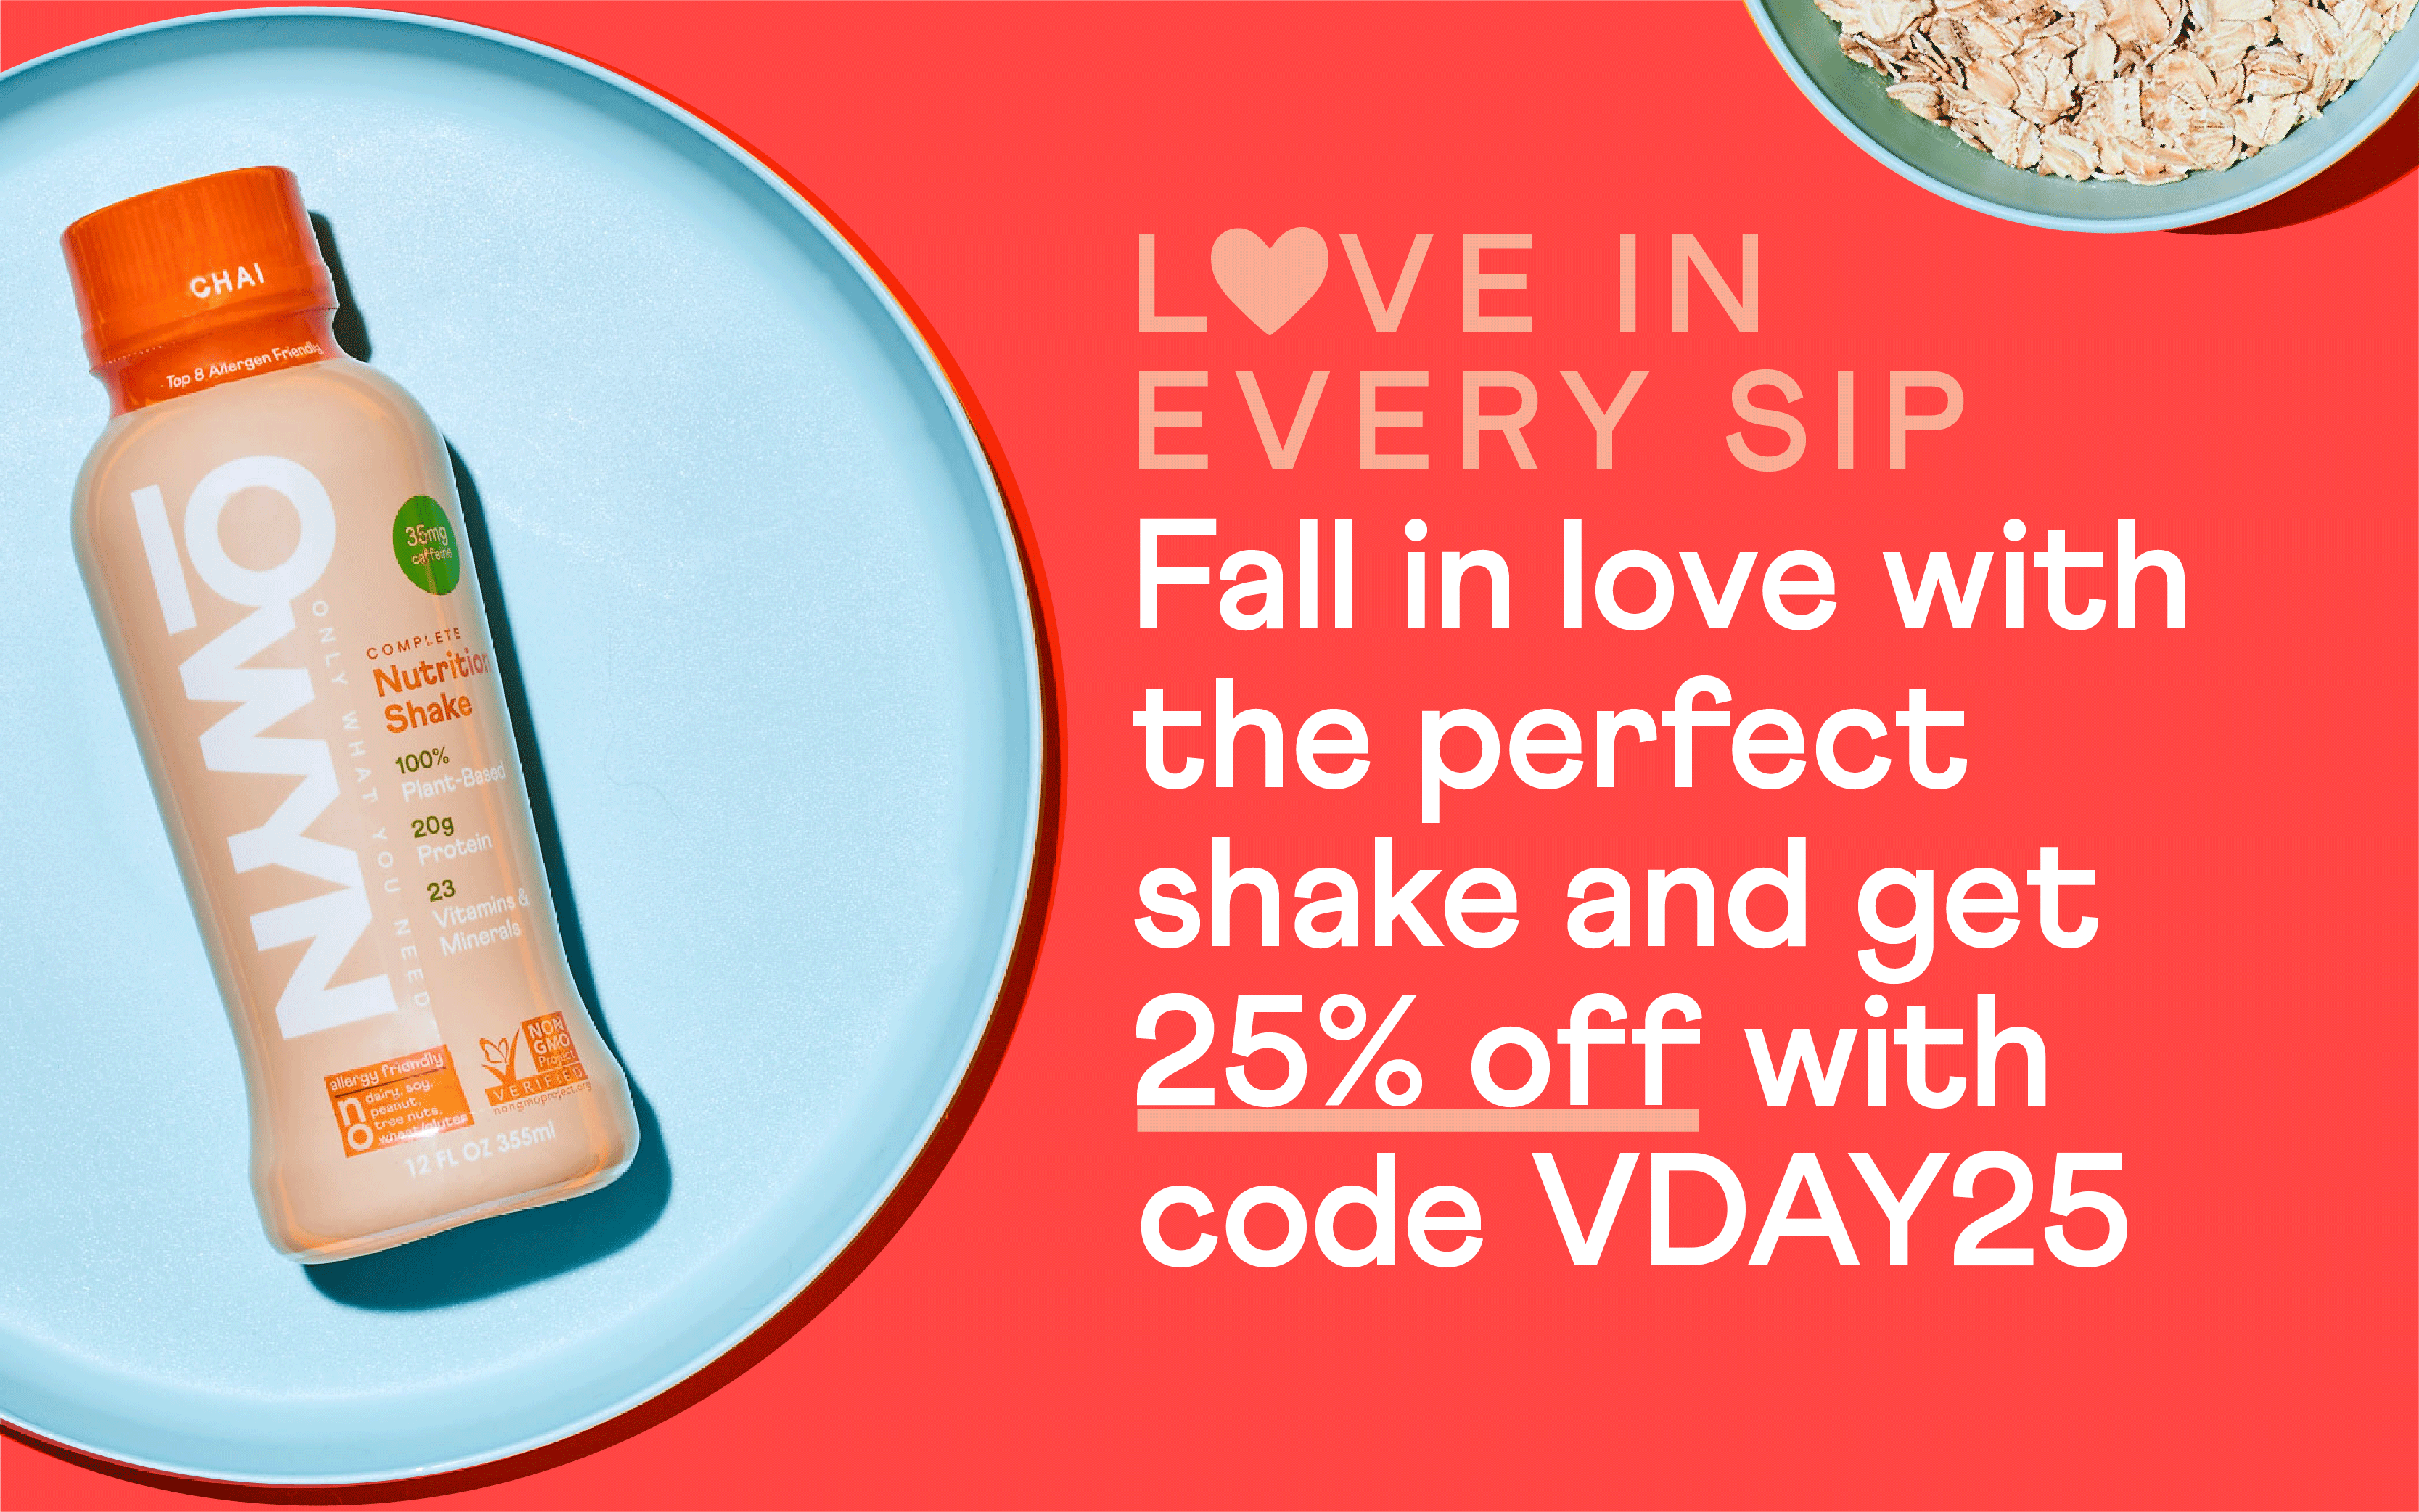 Love in every sip. 25% off 